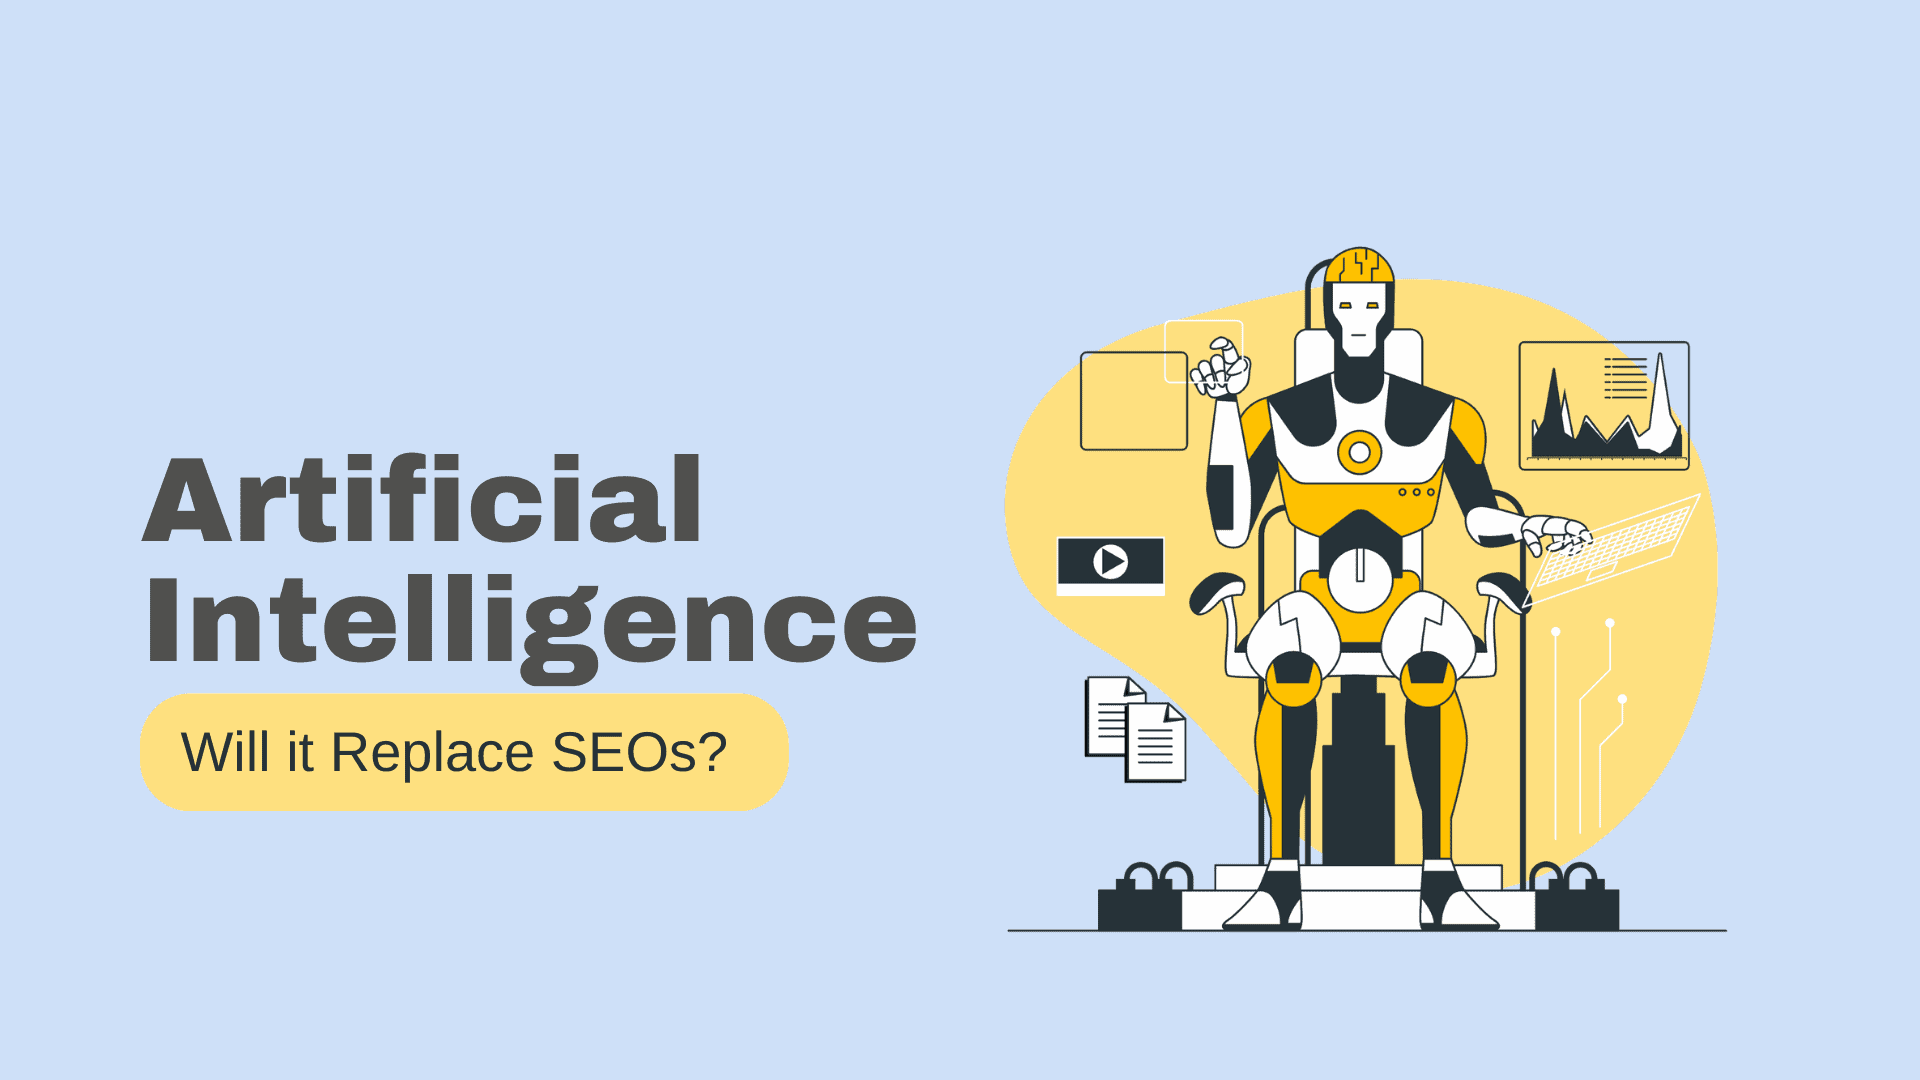 Will Artificial Intelligence Replace SEOs?